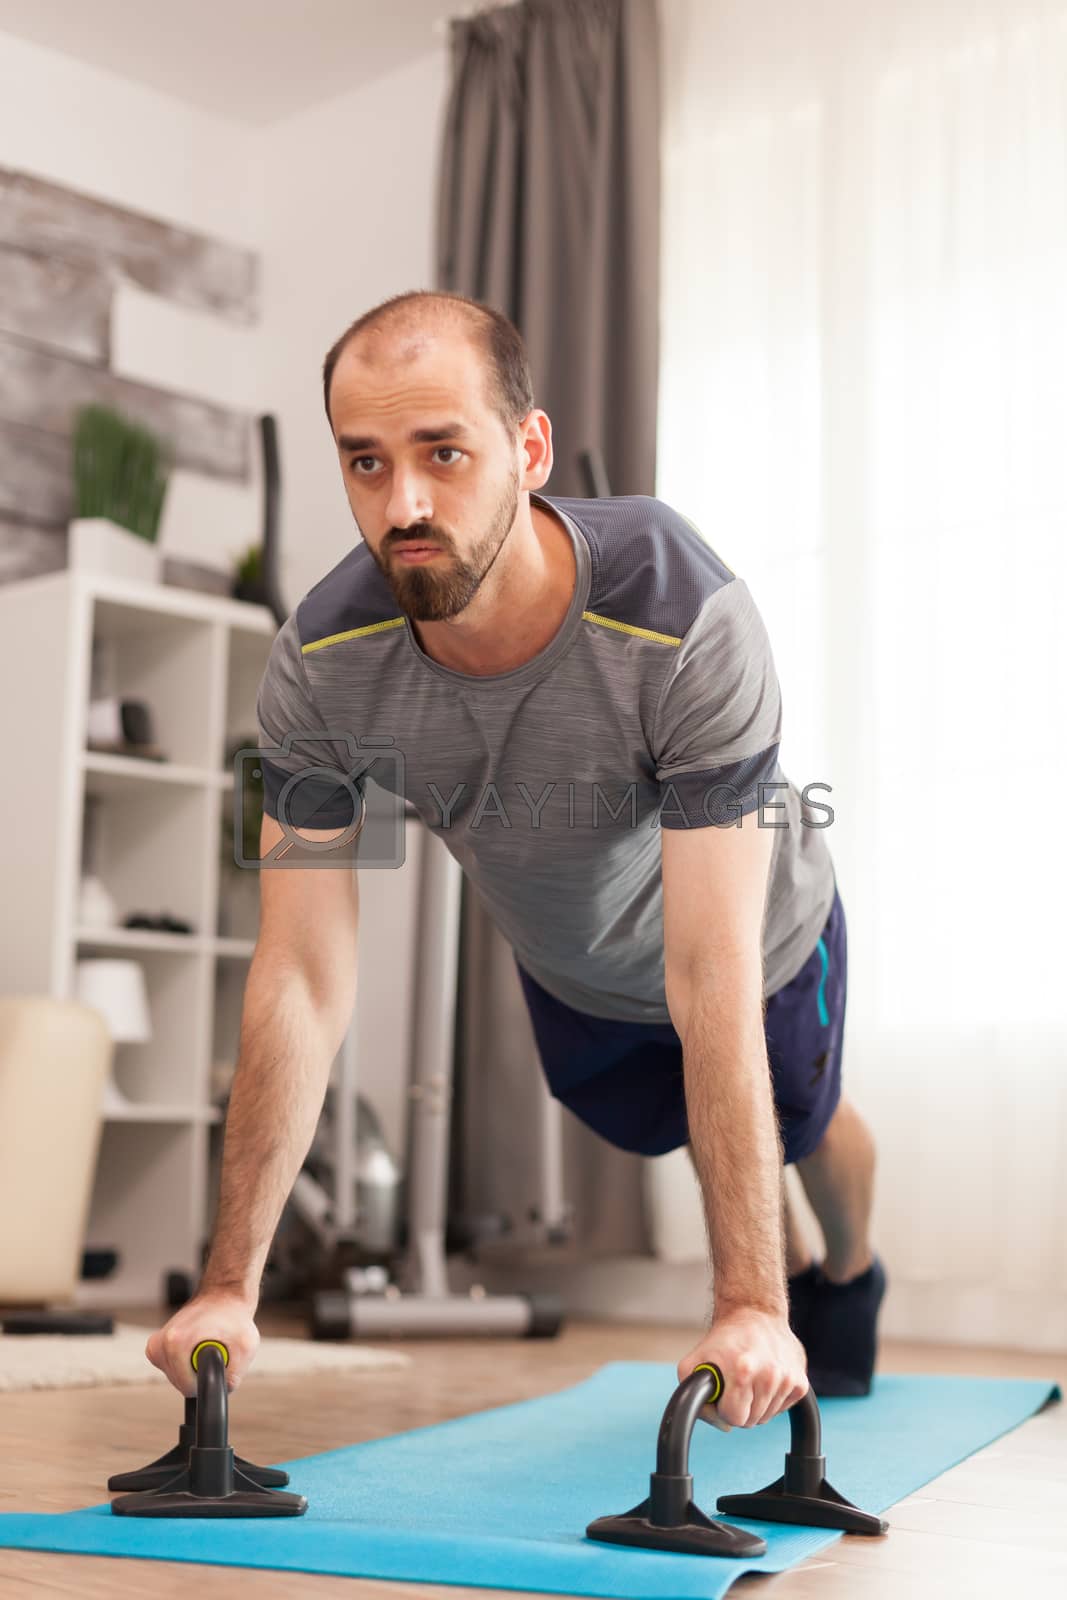 Royalty free image of Man in good physical shape doing push ups by DCStudio